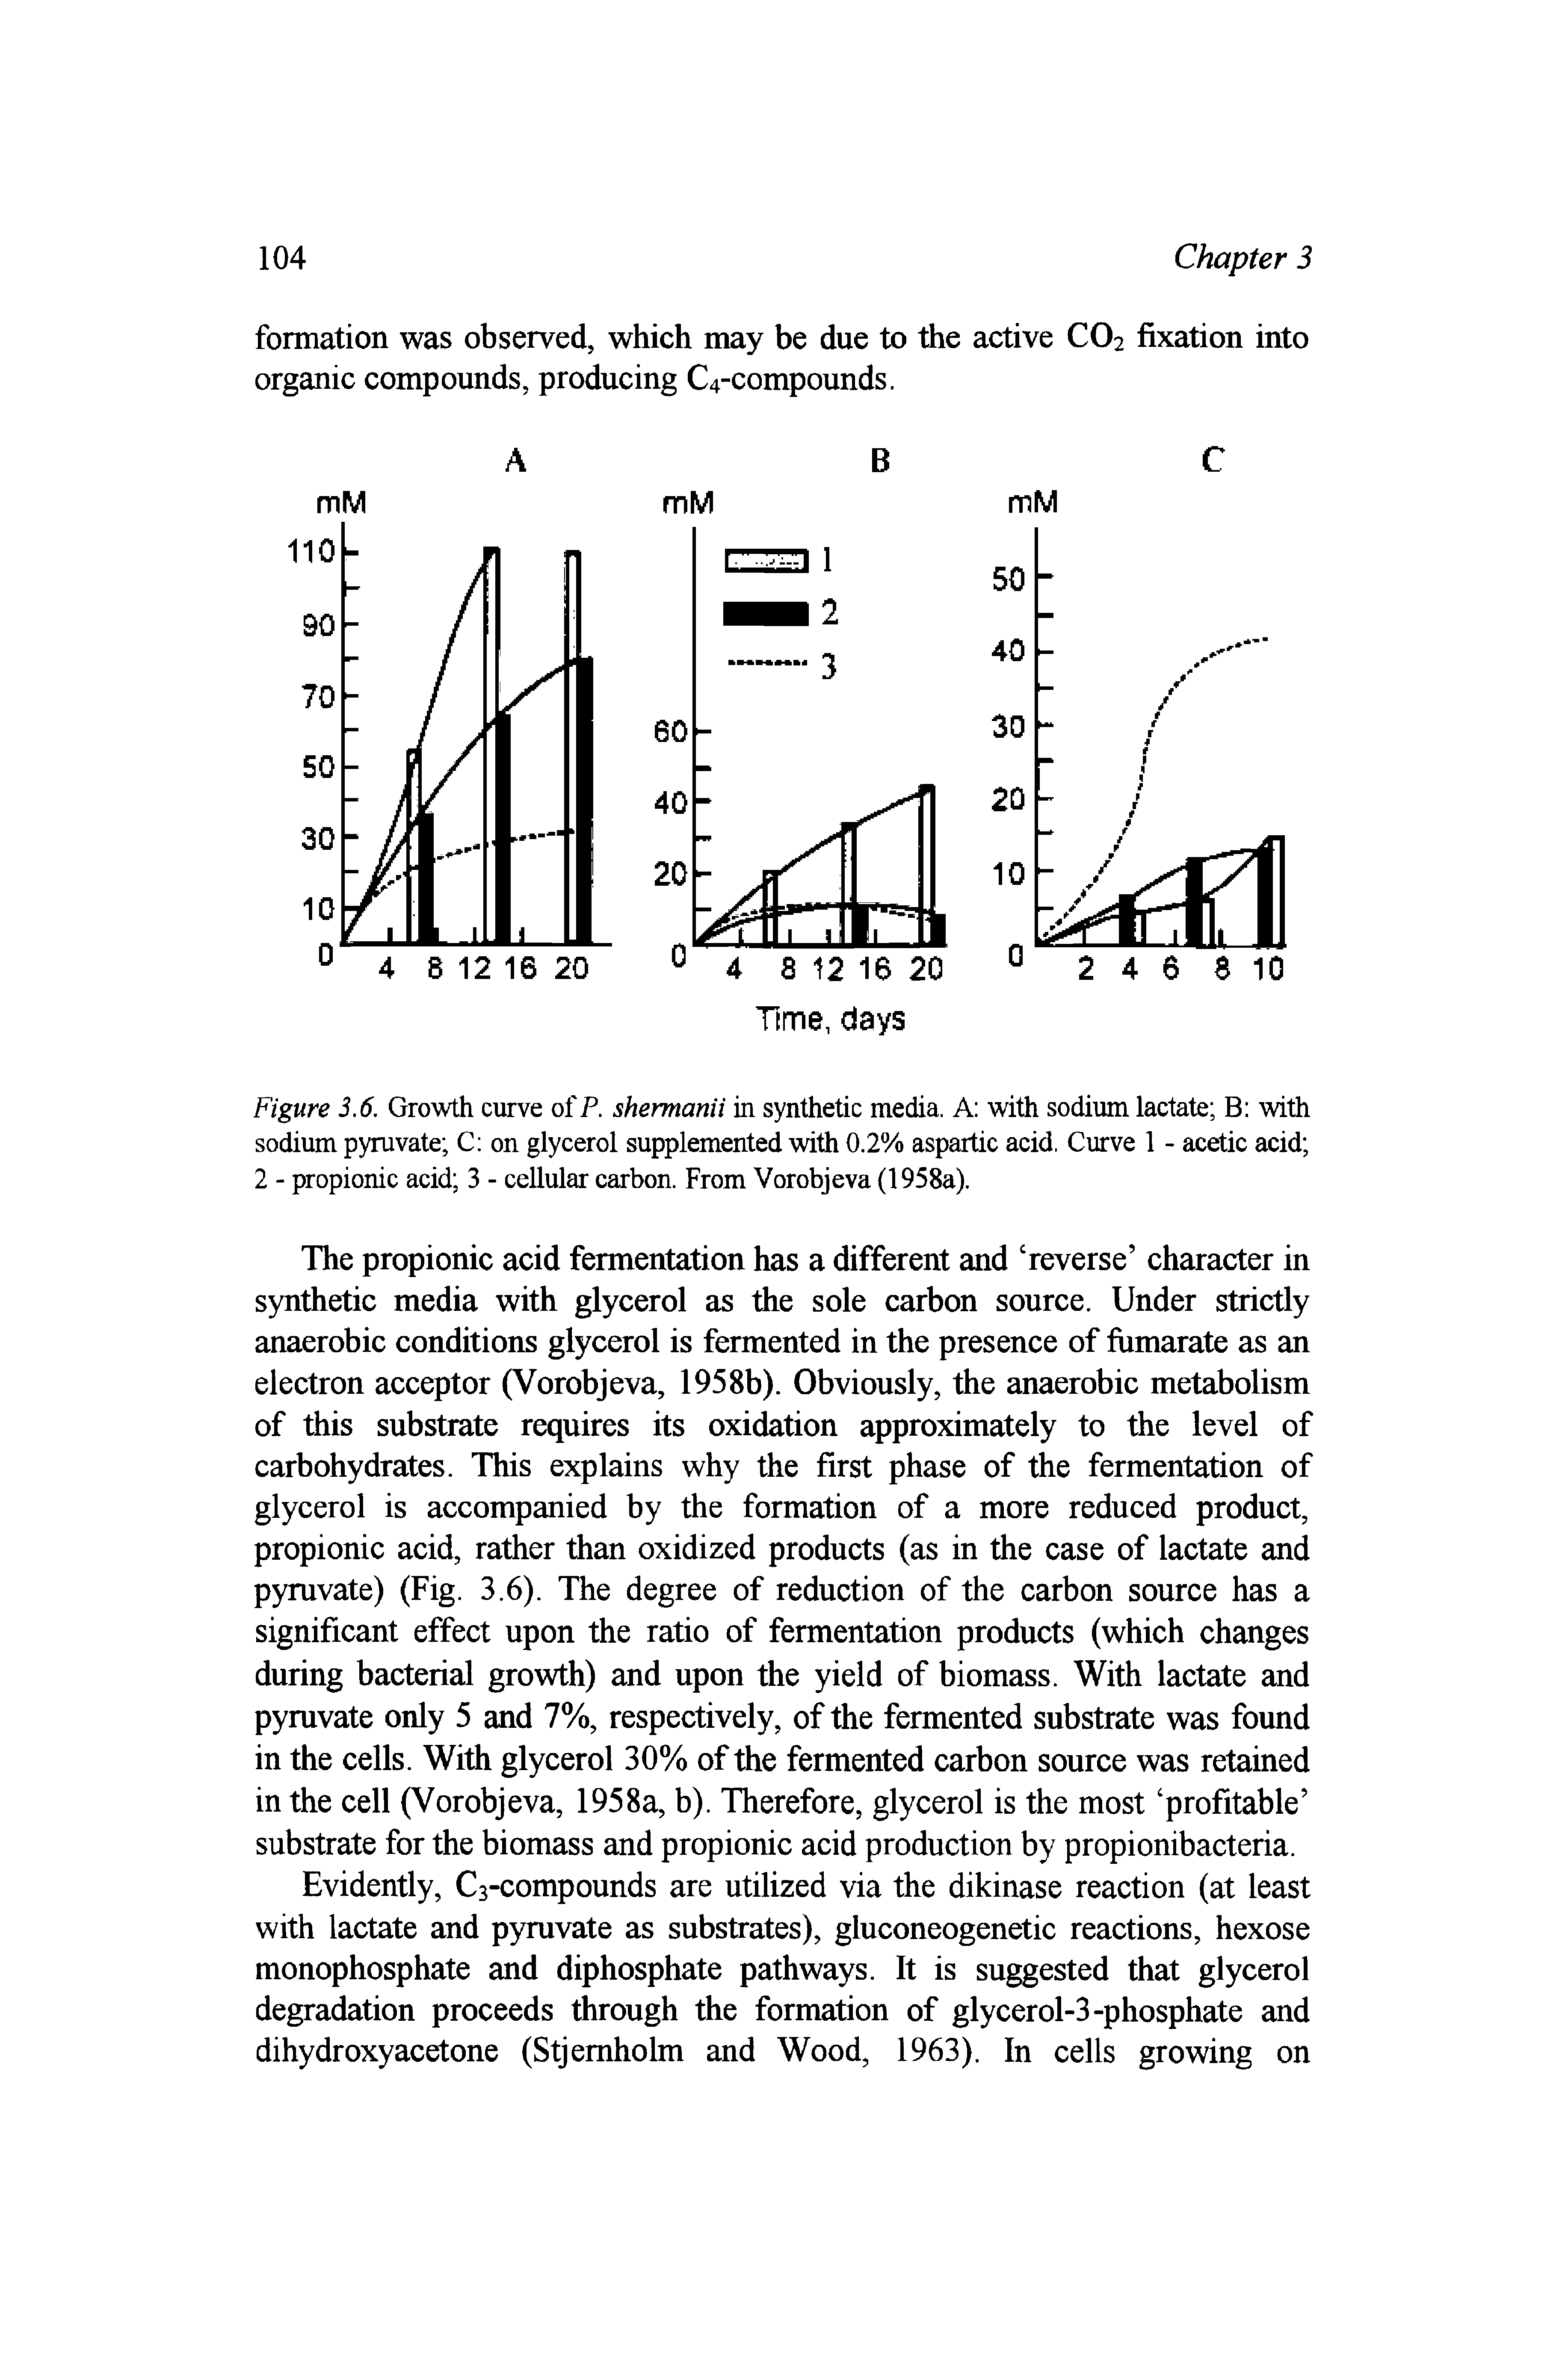 Figure 3.6. Growth curve of P. shermanii in synthetic media. A with sodium lactate B with sodium pyruvate C on glycerol supplemented with 0.2% aspartic acid. Curve 1 - acetic acid 2 - propionic acid 3 - cellular carbon. From Vorobjeva (1958a).